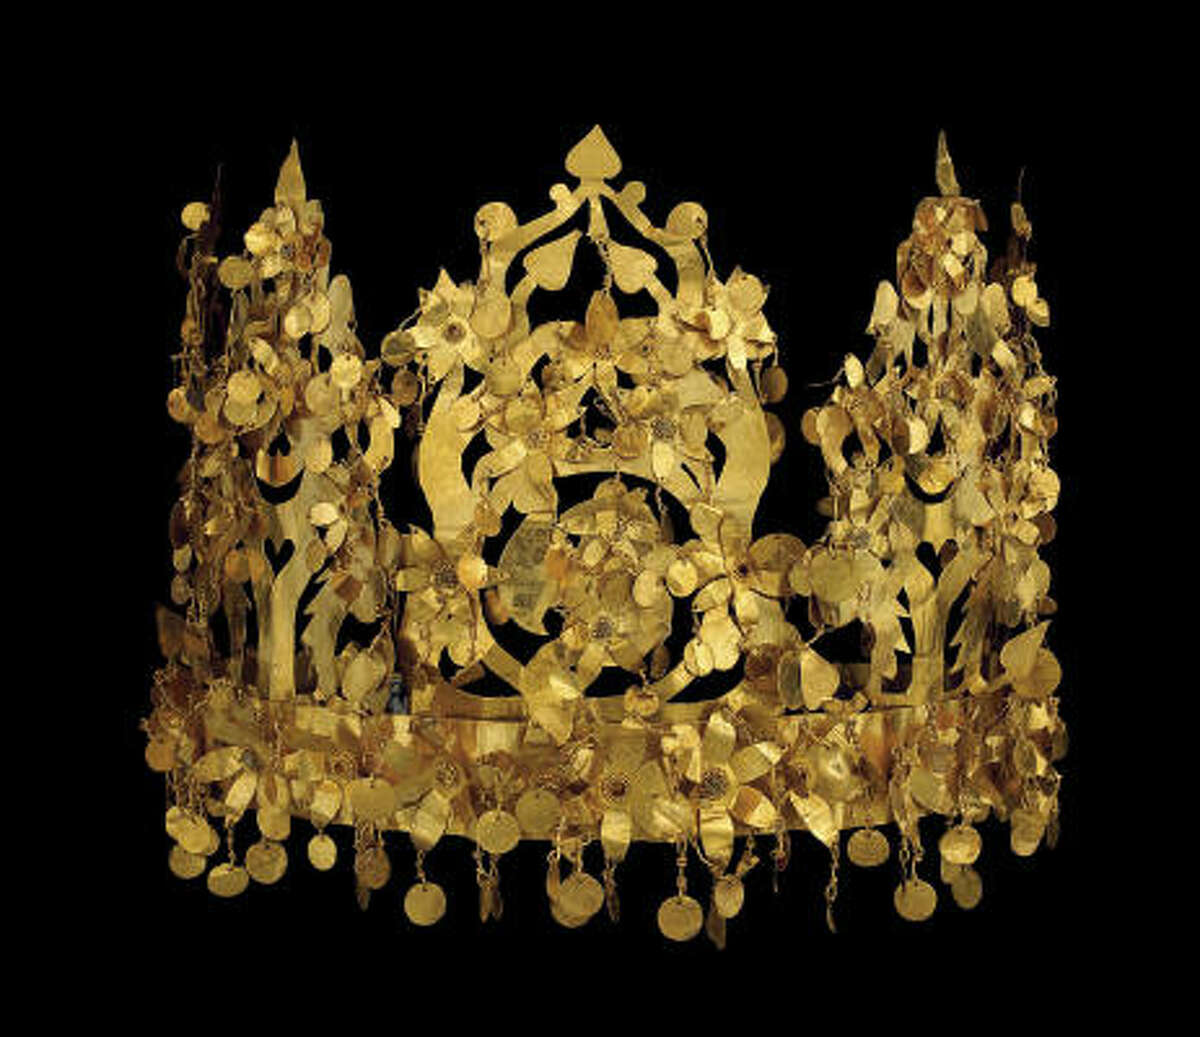 Gold objects, such as this crown, were hidden for safekeeping until now.